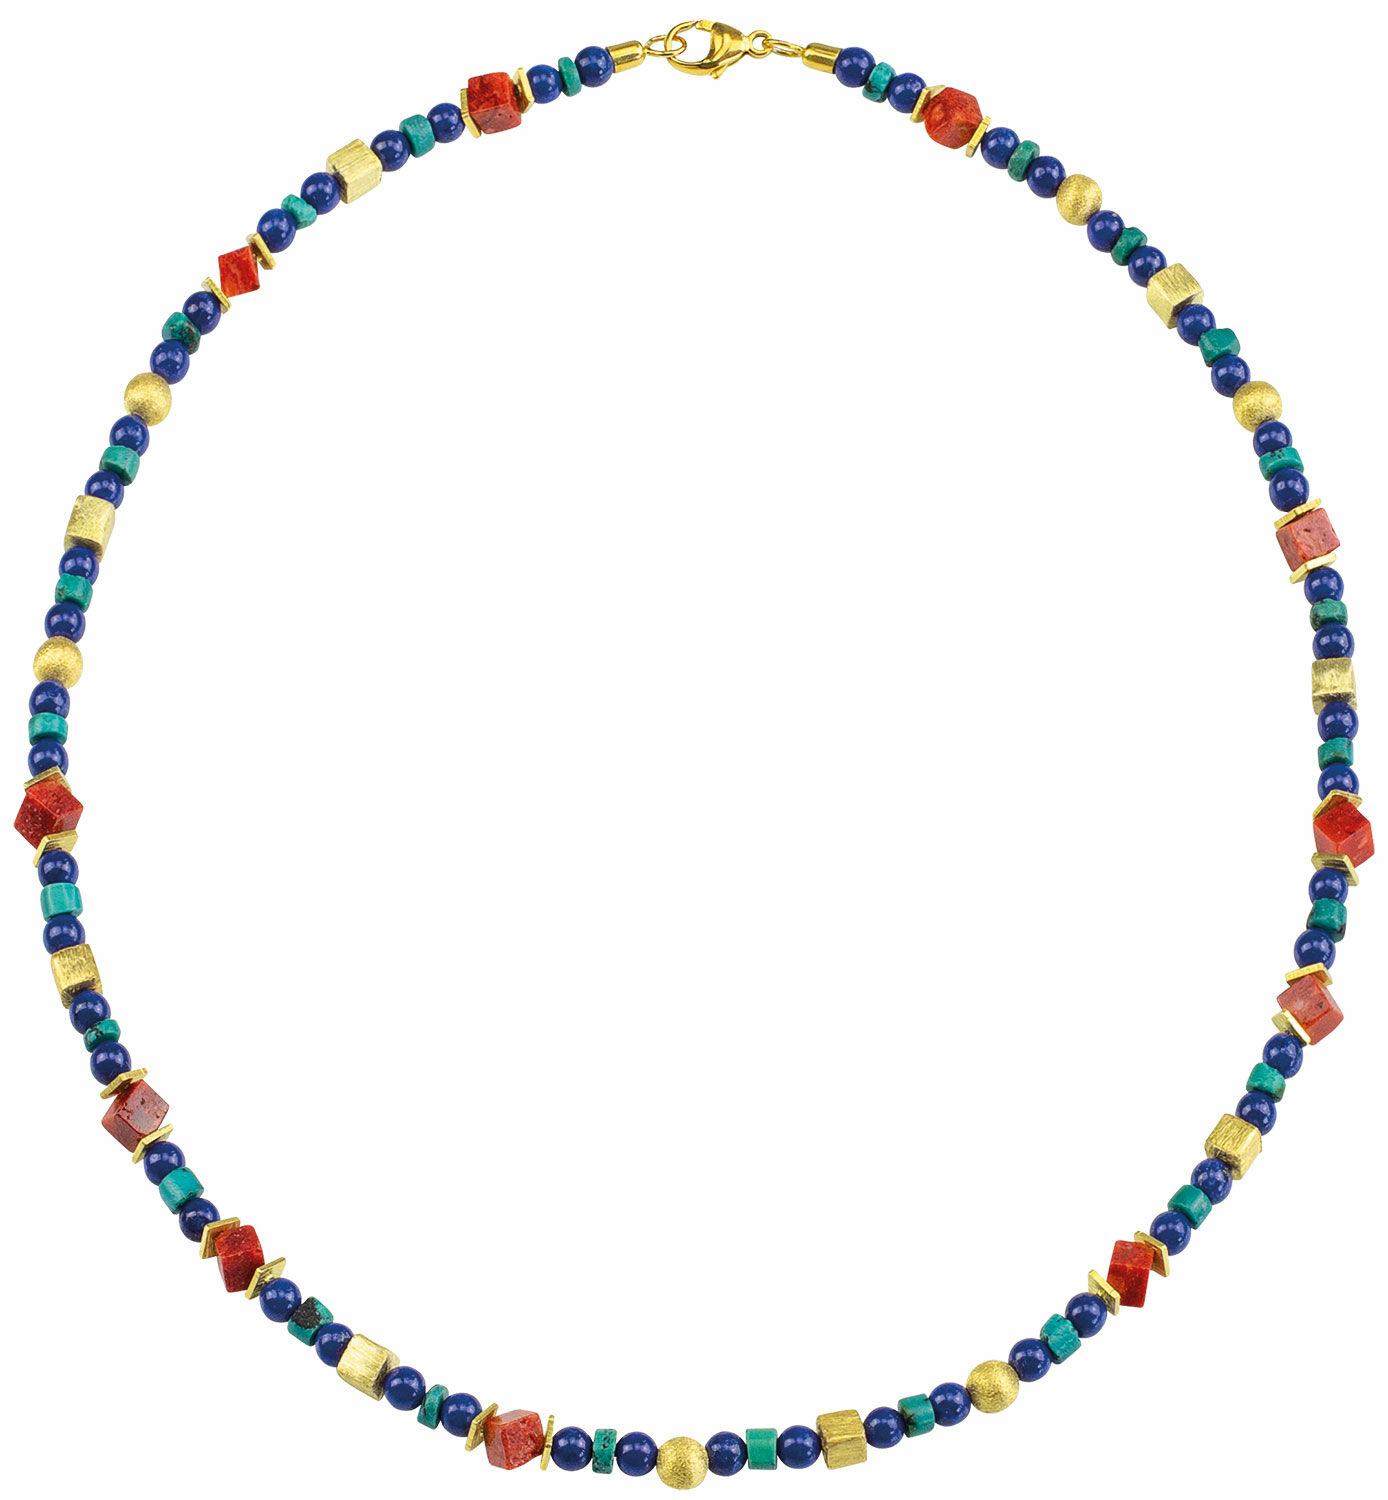 Necklace "Shining Night" by Ray Alba